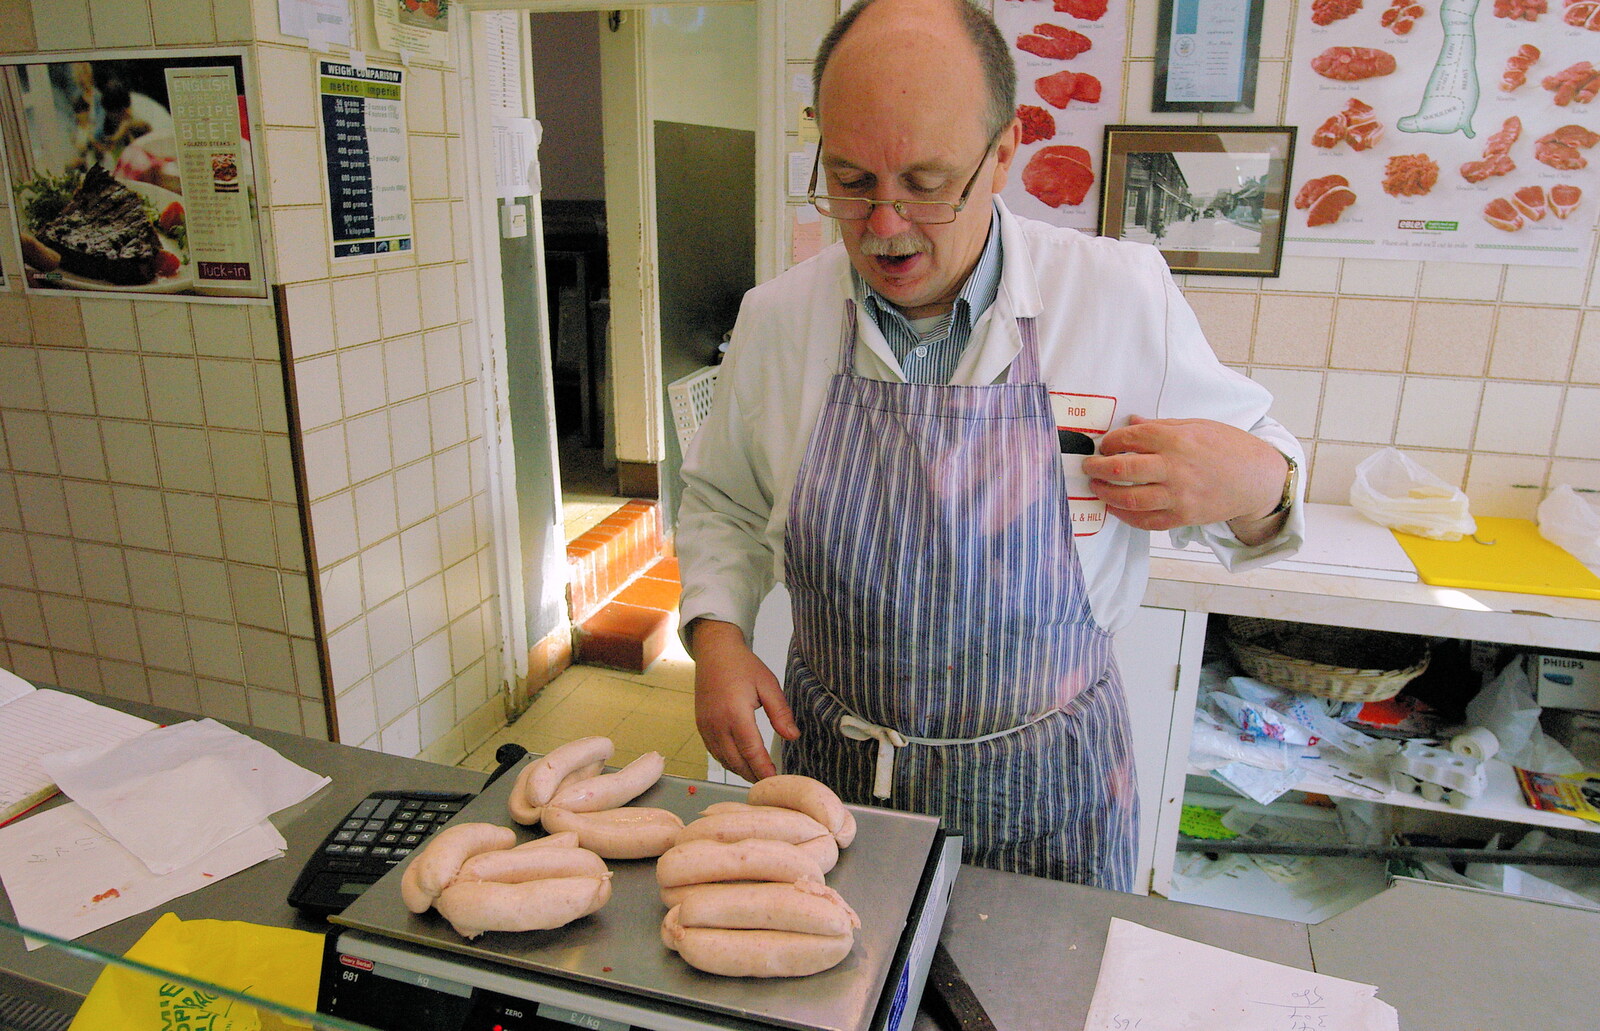 A Trip Around Macclesfield and Sandbach, Cheshire - 10th September 2005: Sausages are weighed